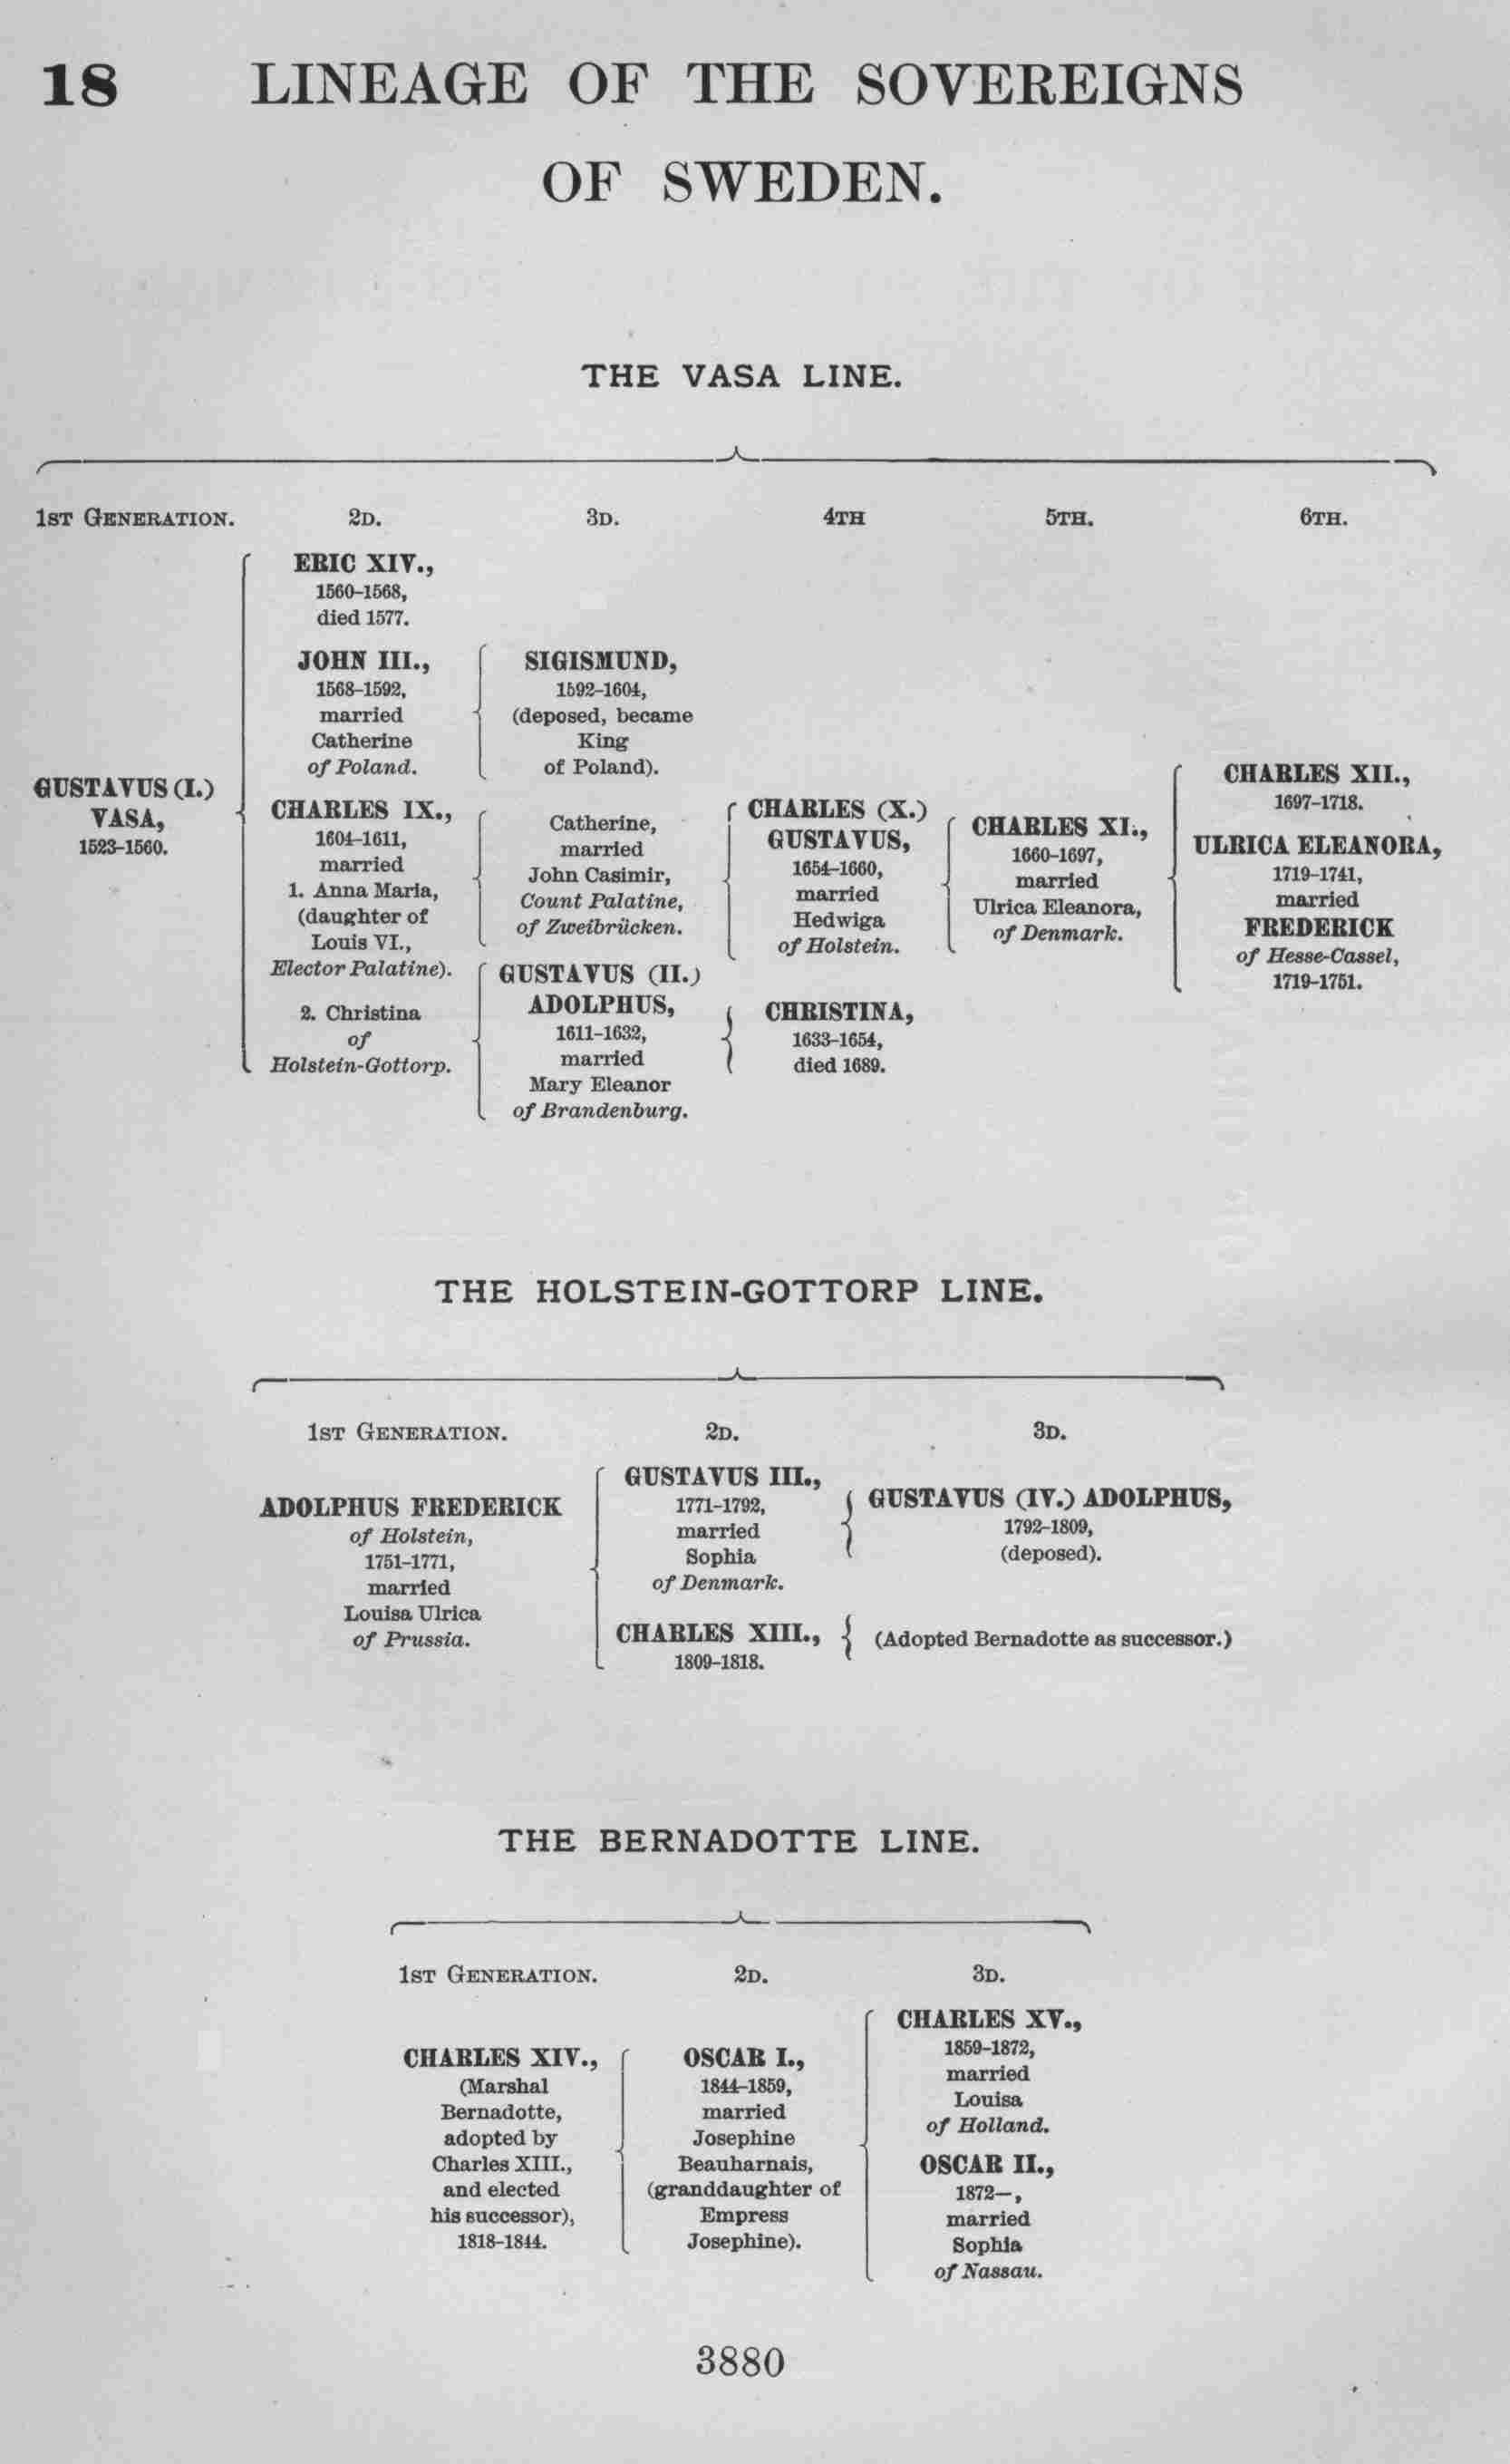 LINEAGE OF THE SOVEREIGNS OF SWEDEN.